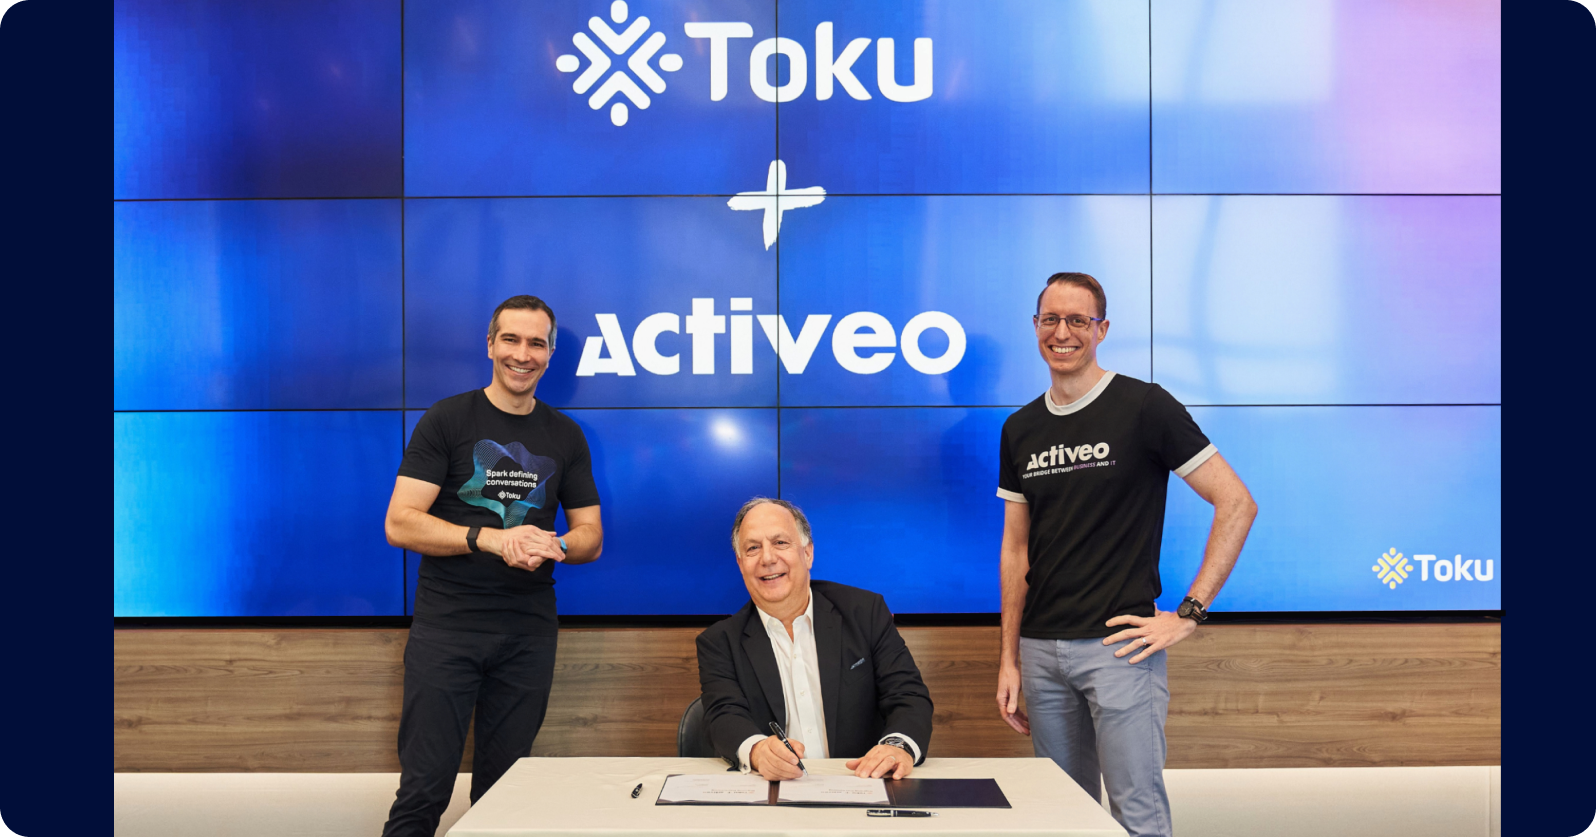 Toku acquires Activeo signing ceremony 3x